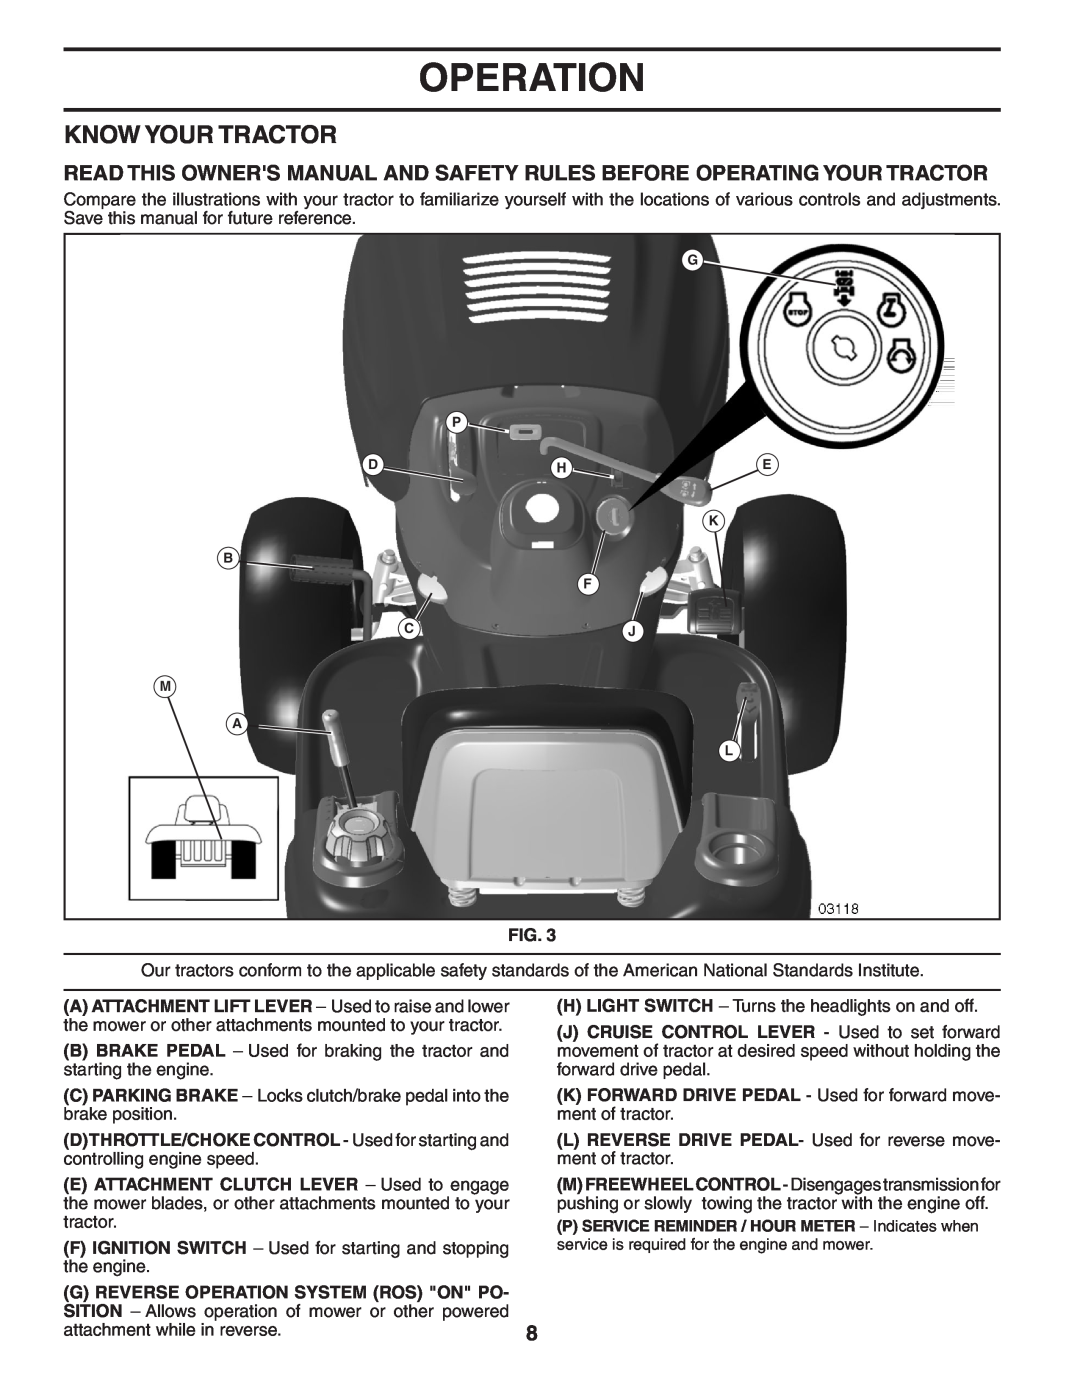 Poulan 403808 manual Know Your Tractor, Operation 